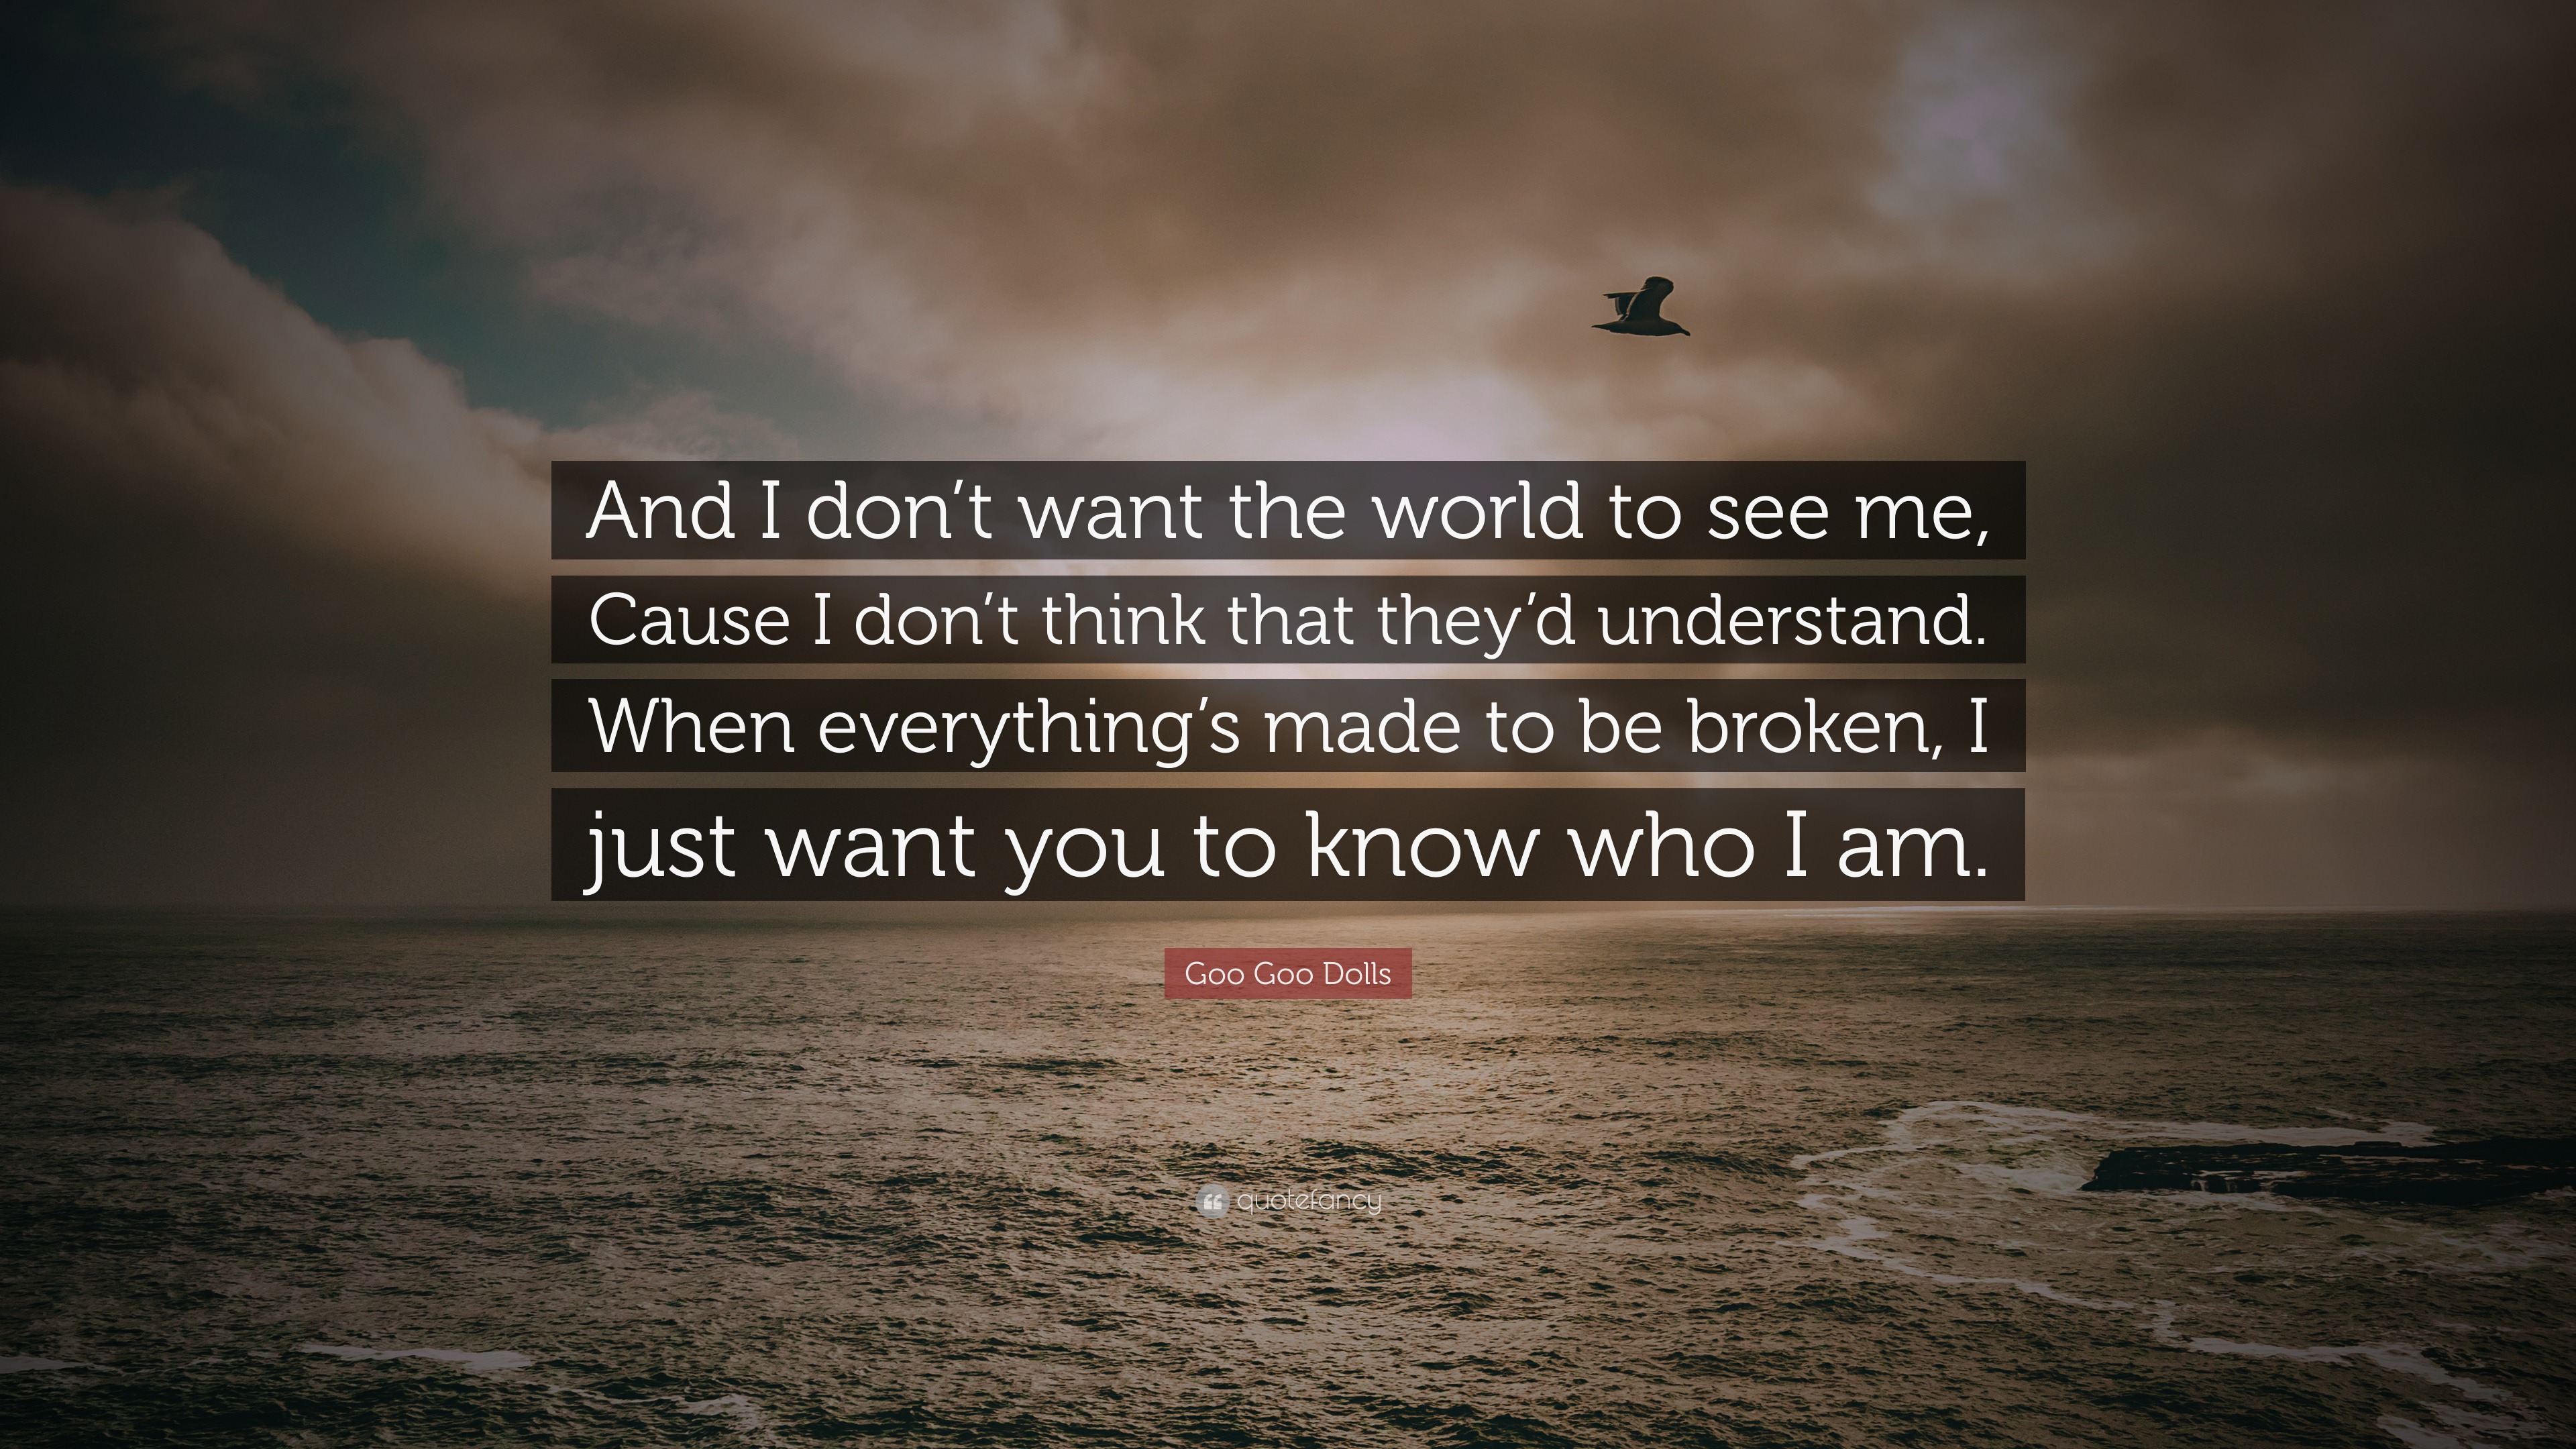 Goo Goo Dolls Quote “And I don’t want the world to see me, Cause I don